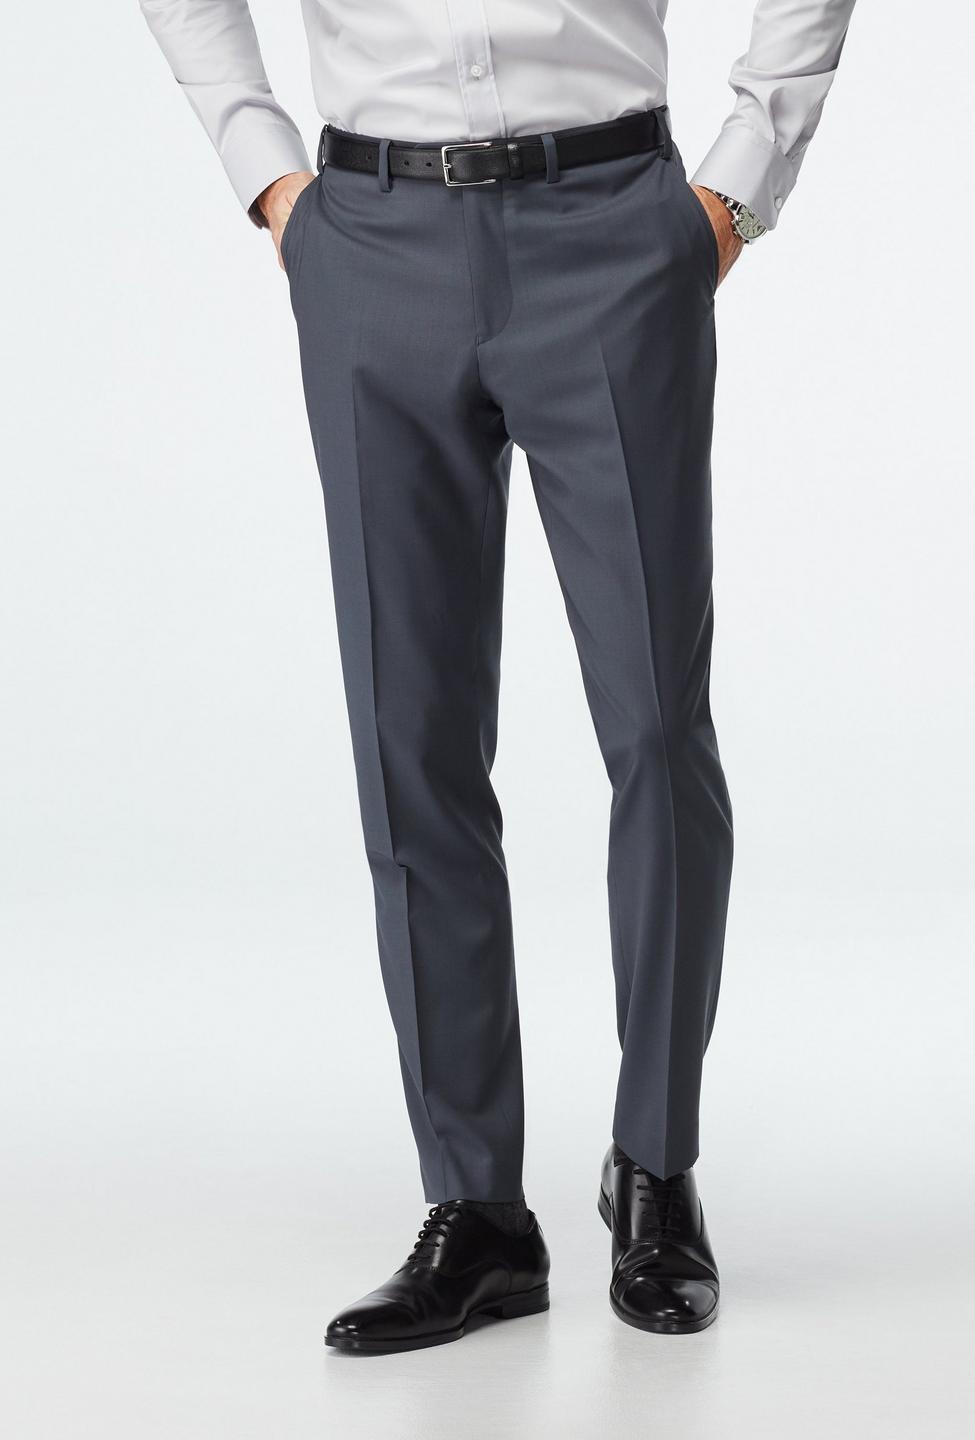 Gray pants - Milano Solid Design from Luxury Indochino Collection